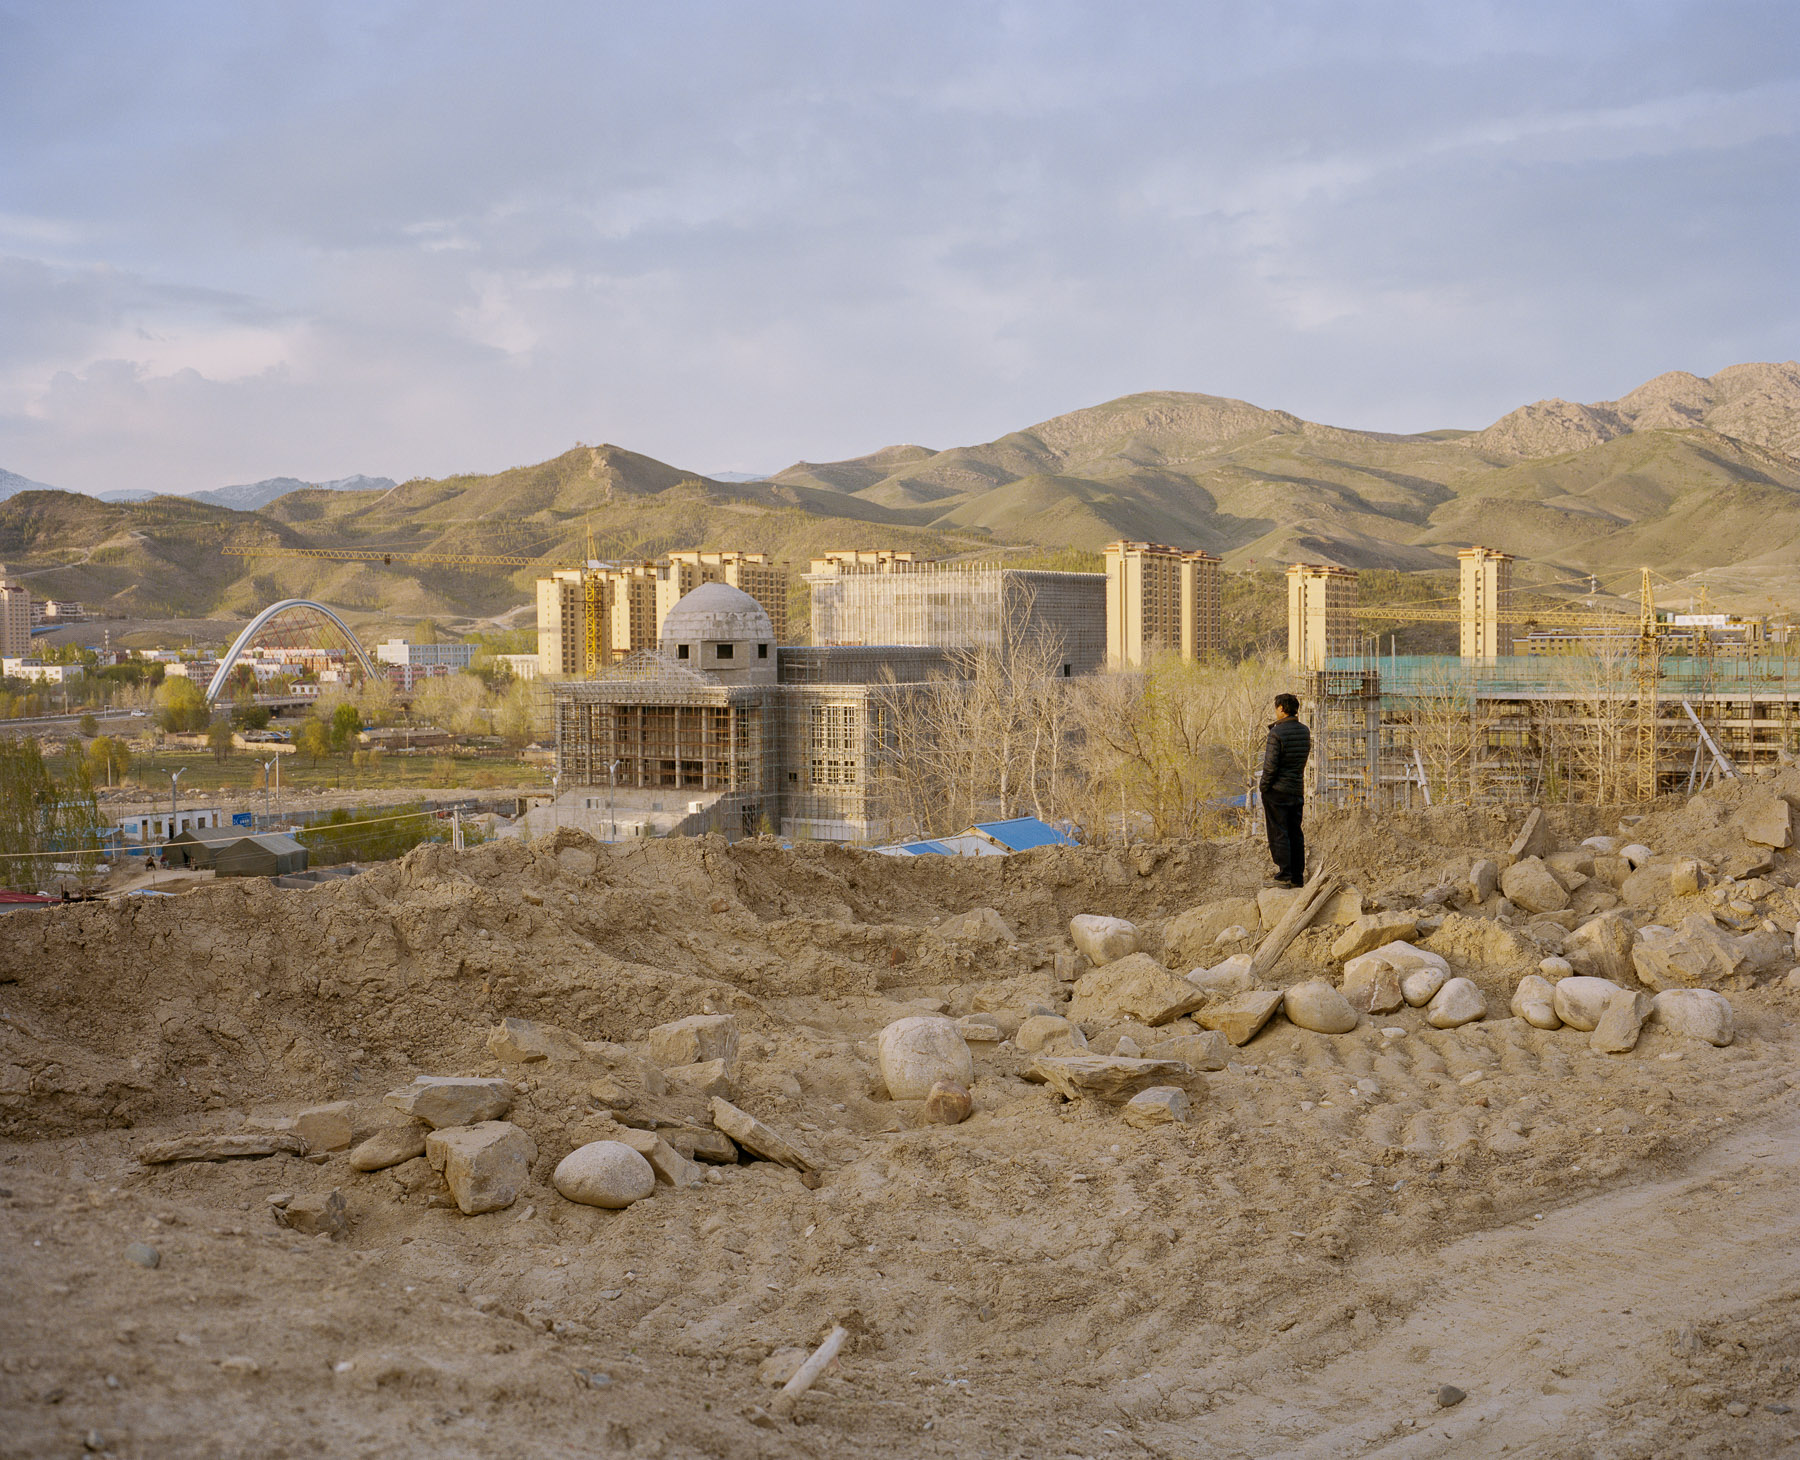  May 2017. Xinjiang province, China. Han Chinese migrant worker from the East of China making a call overlooking new constructions in Altay, a county-level city in Ili Kazakh Autonomous Prefecture, in far northern Xinjiang, China. It is the administr